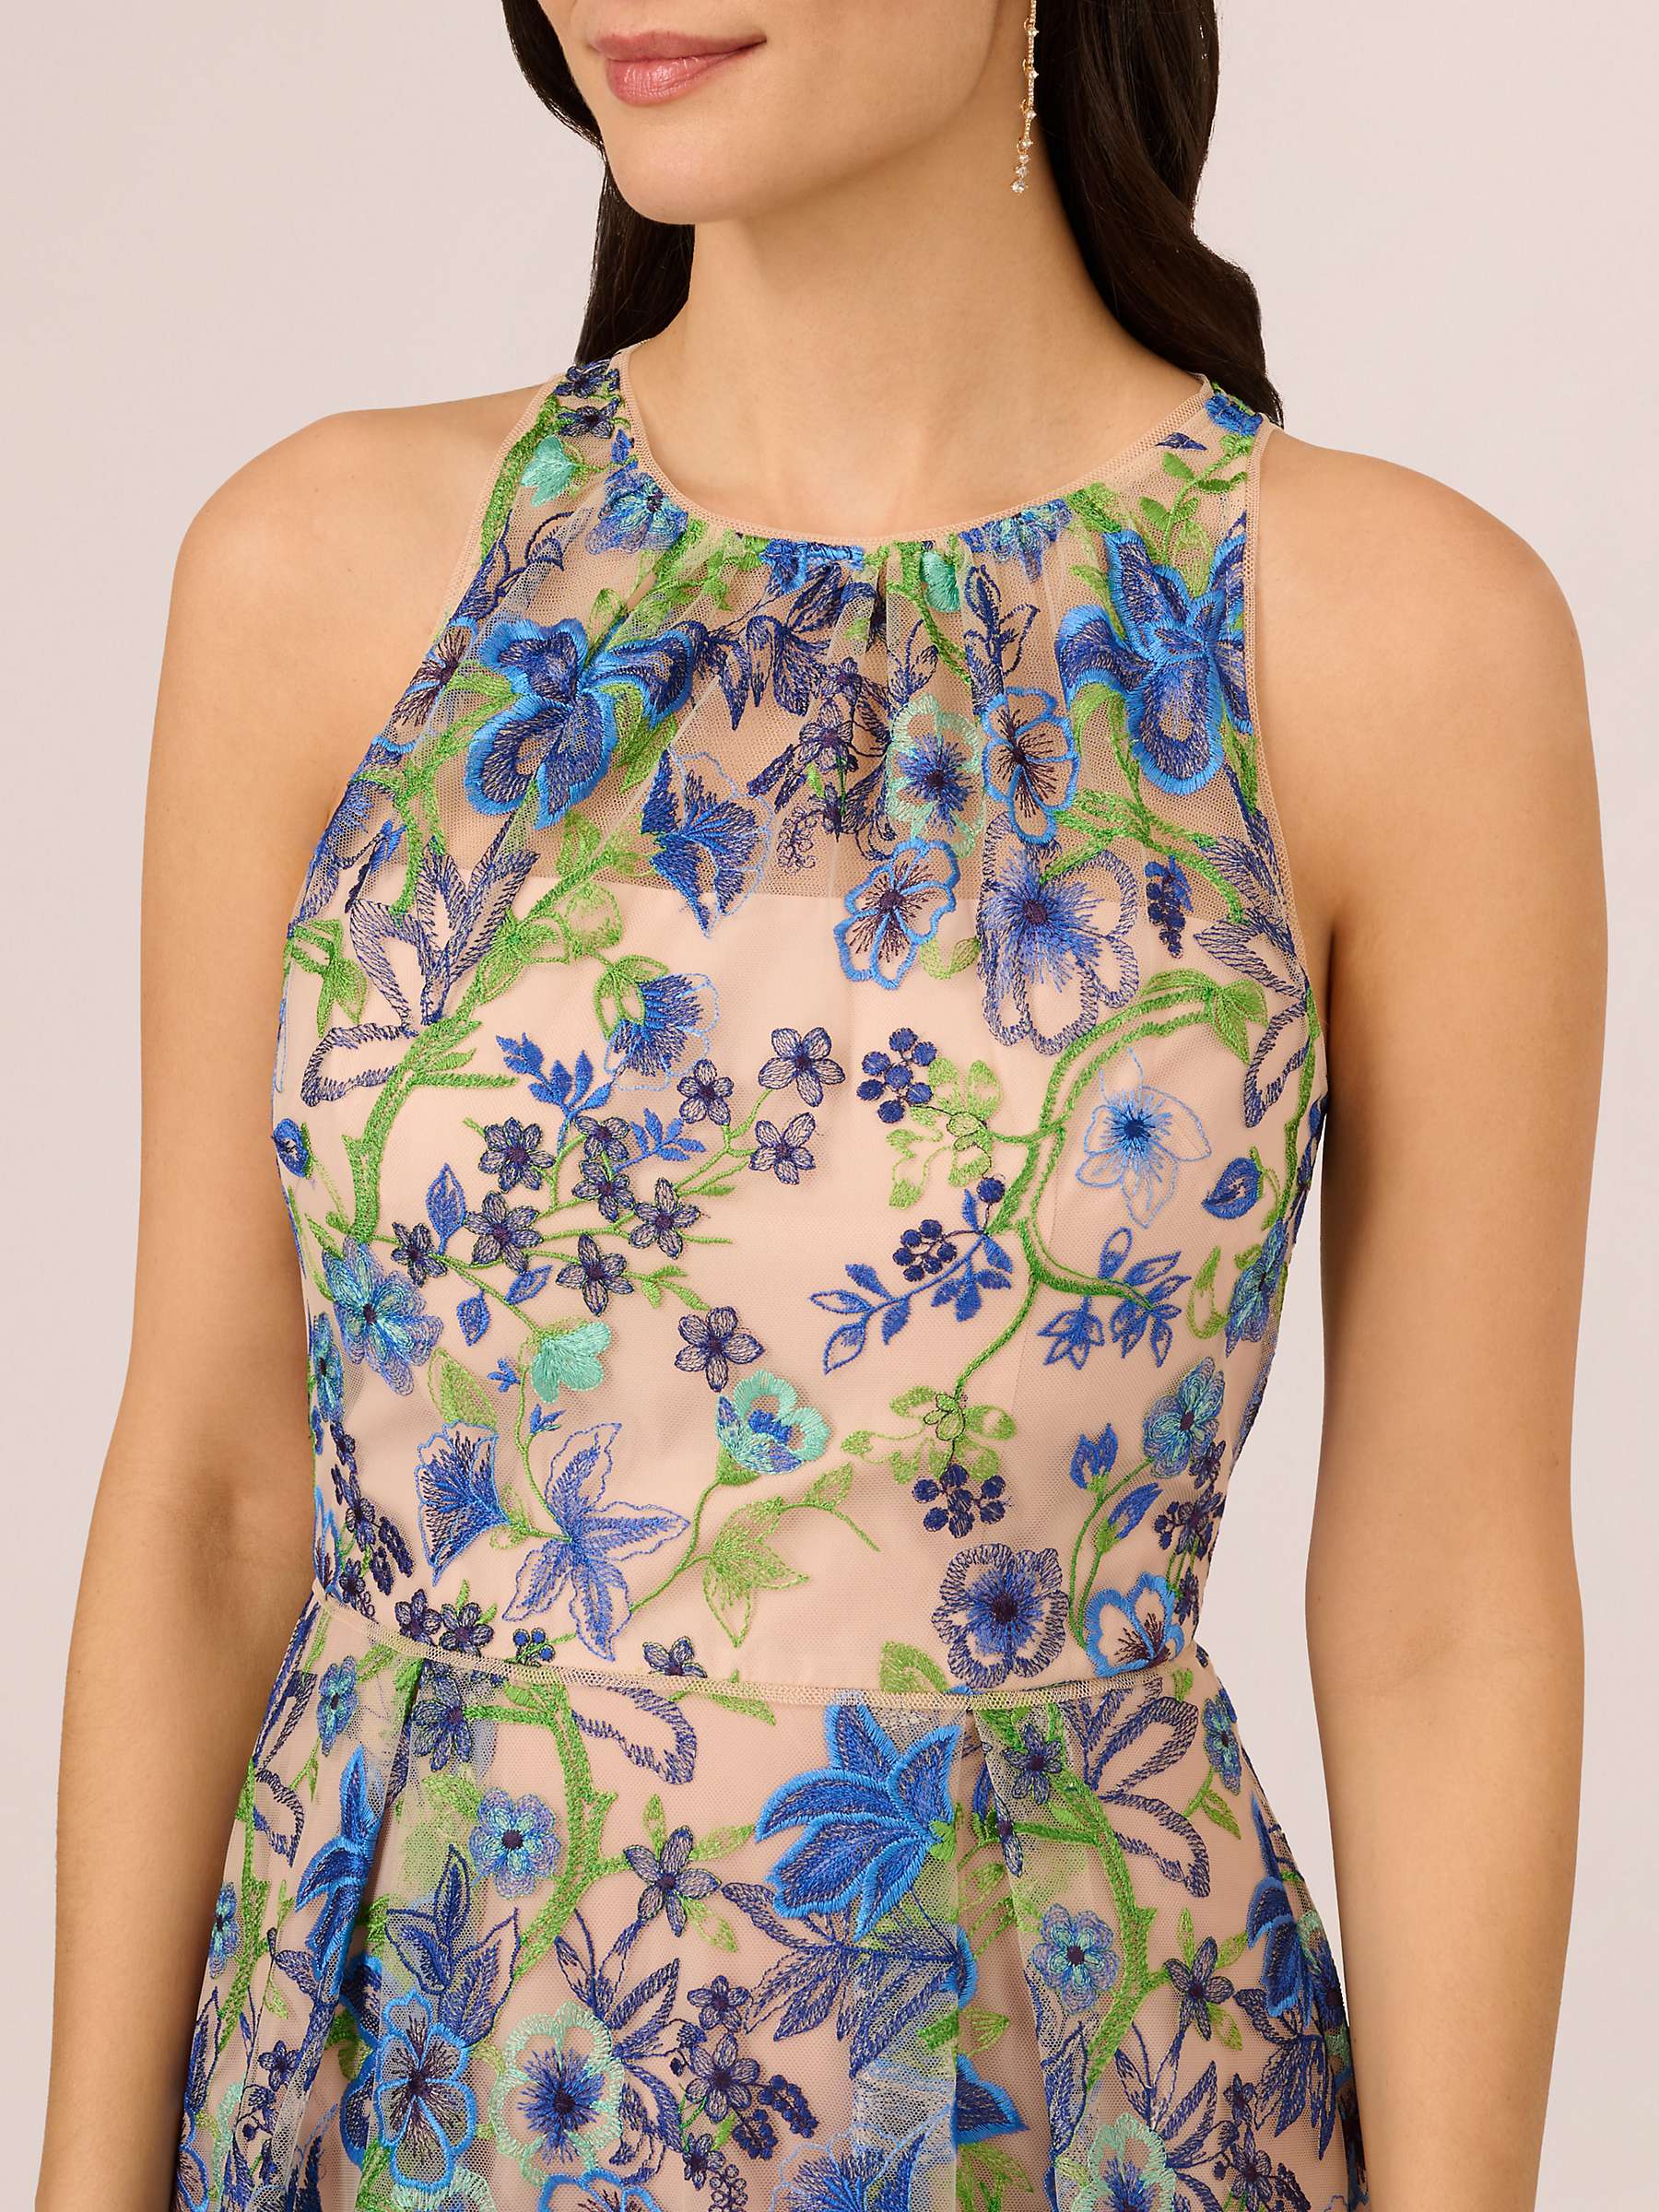 Buy Adrianna Papell Embroidered Fit and Flare Dress, Blue/Multi Online at johnlewis.com